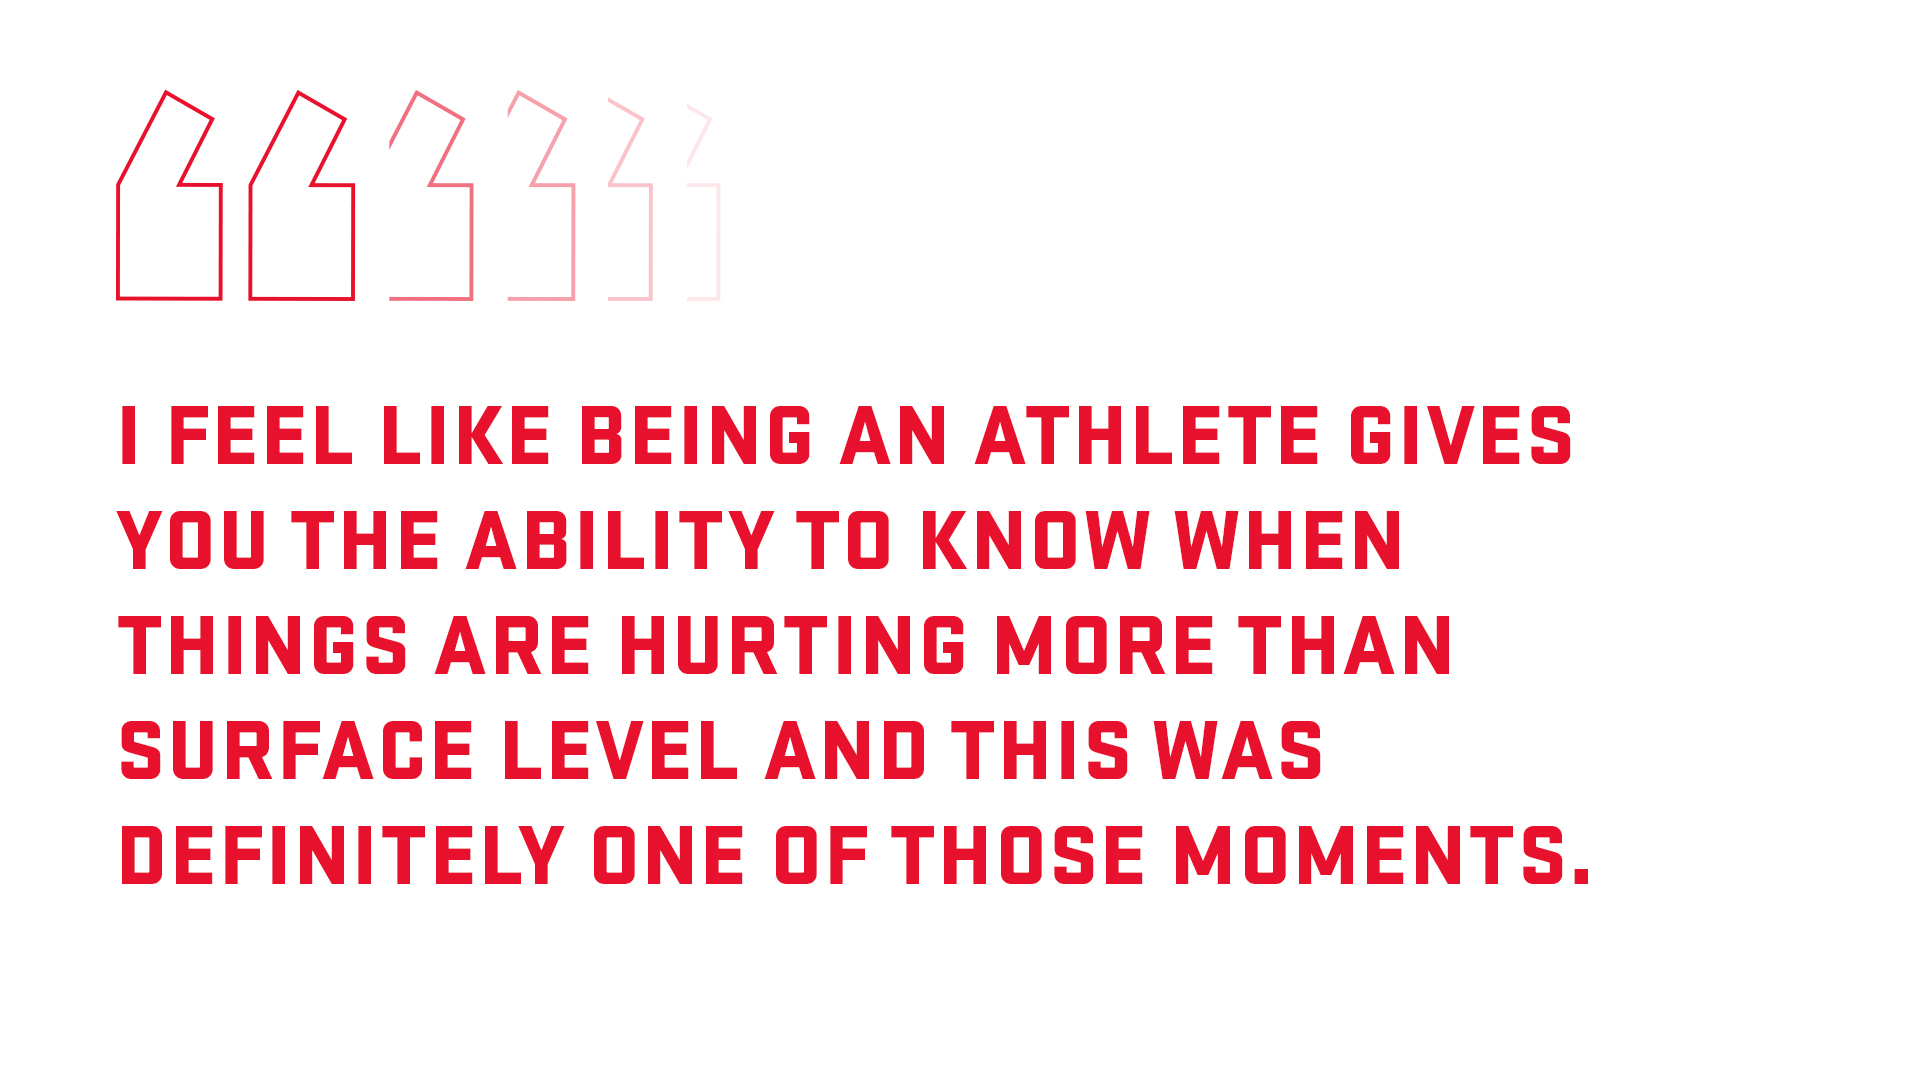 Pull quote: I feel like being an athlete gives you the ability to know when you are hurting more than surface level and this was definitely one of those moments. 